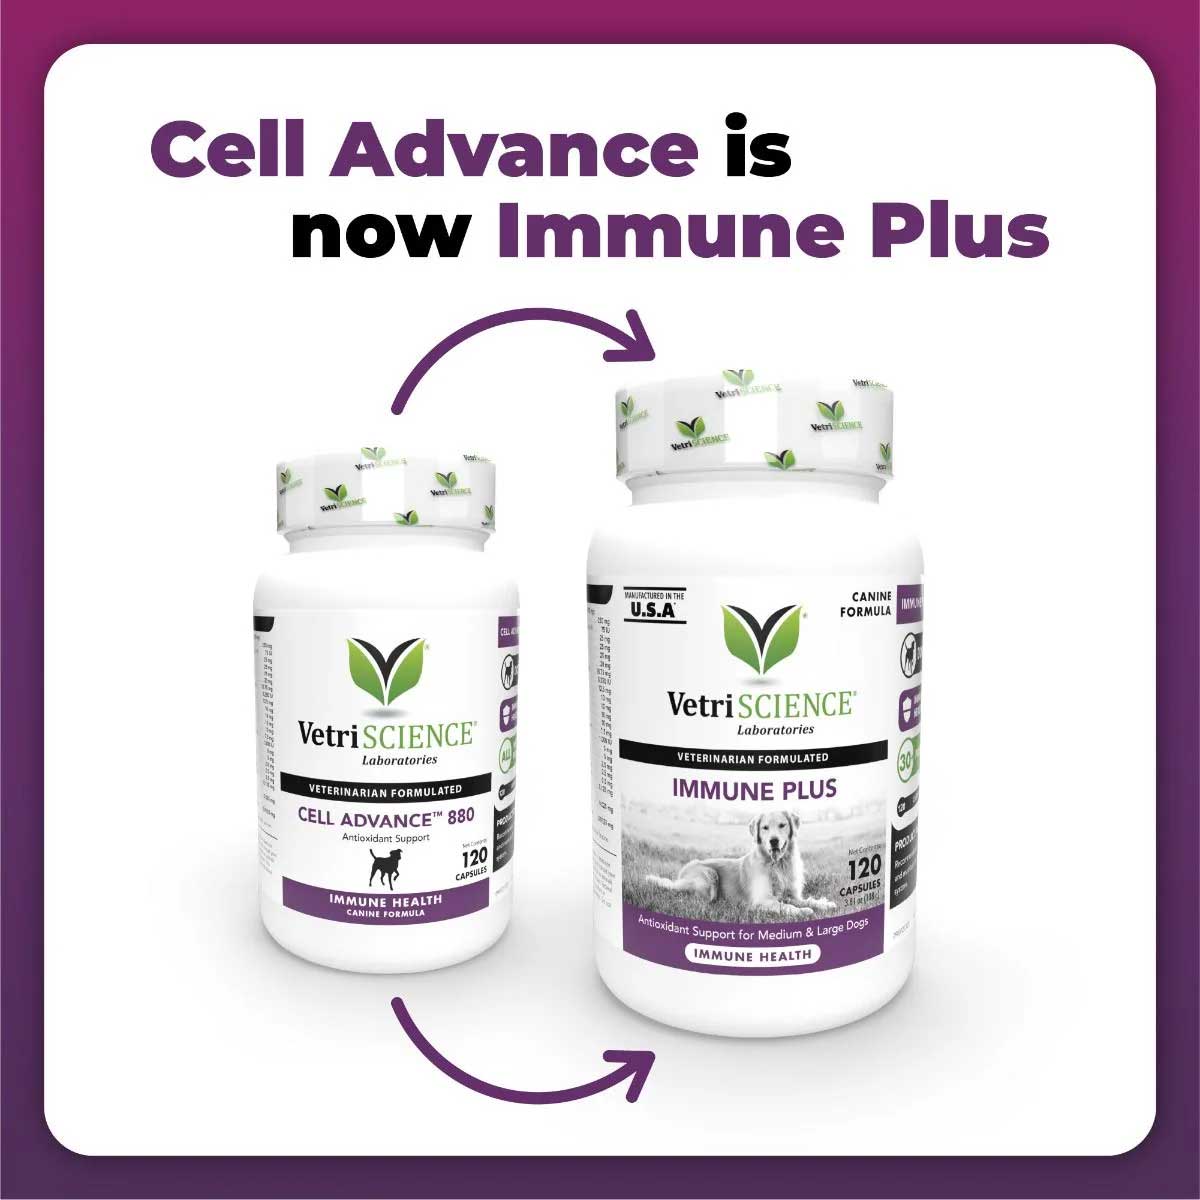 VetriScience Laboratories Immune Plus Immunity Support for Medium & Large Dogs (Formerly Cell Advance 880) New Look